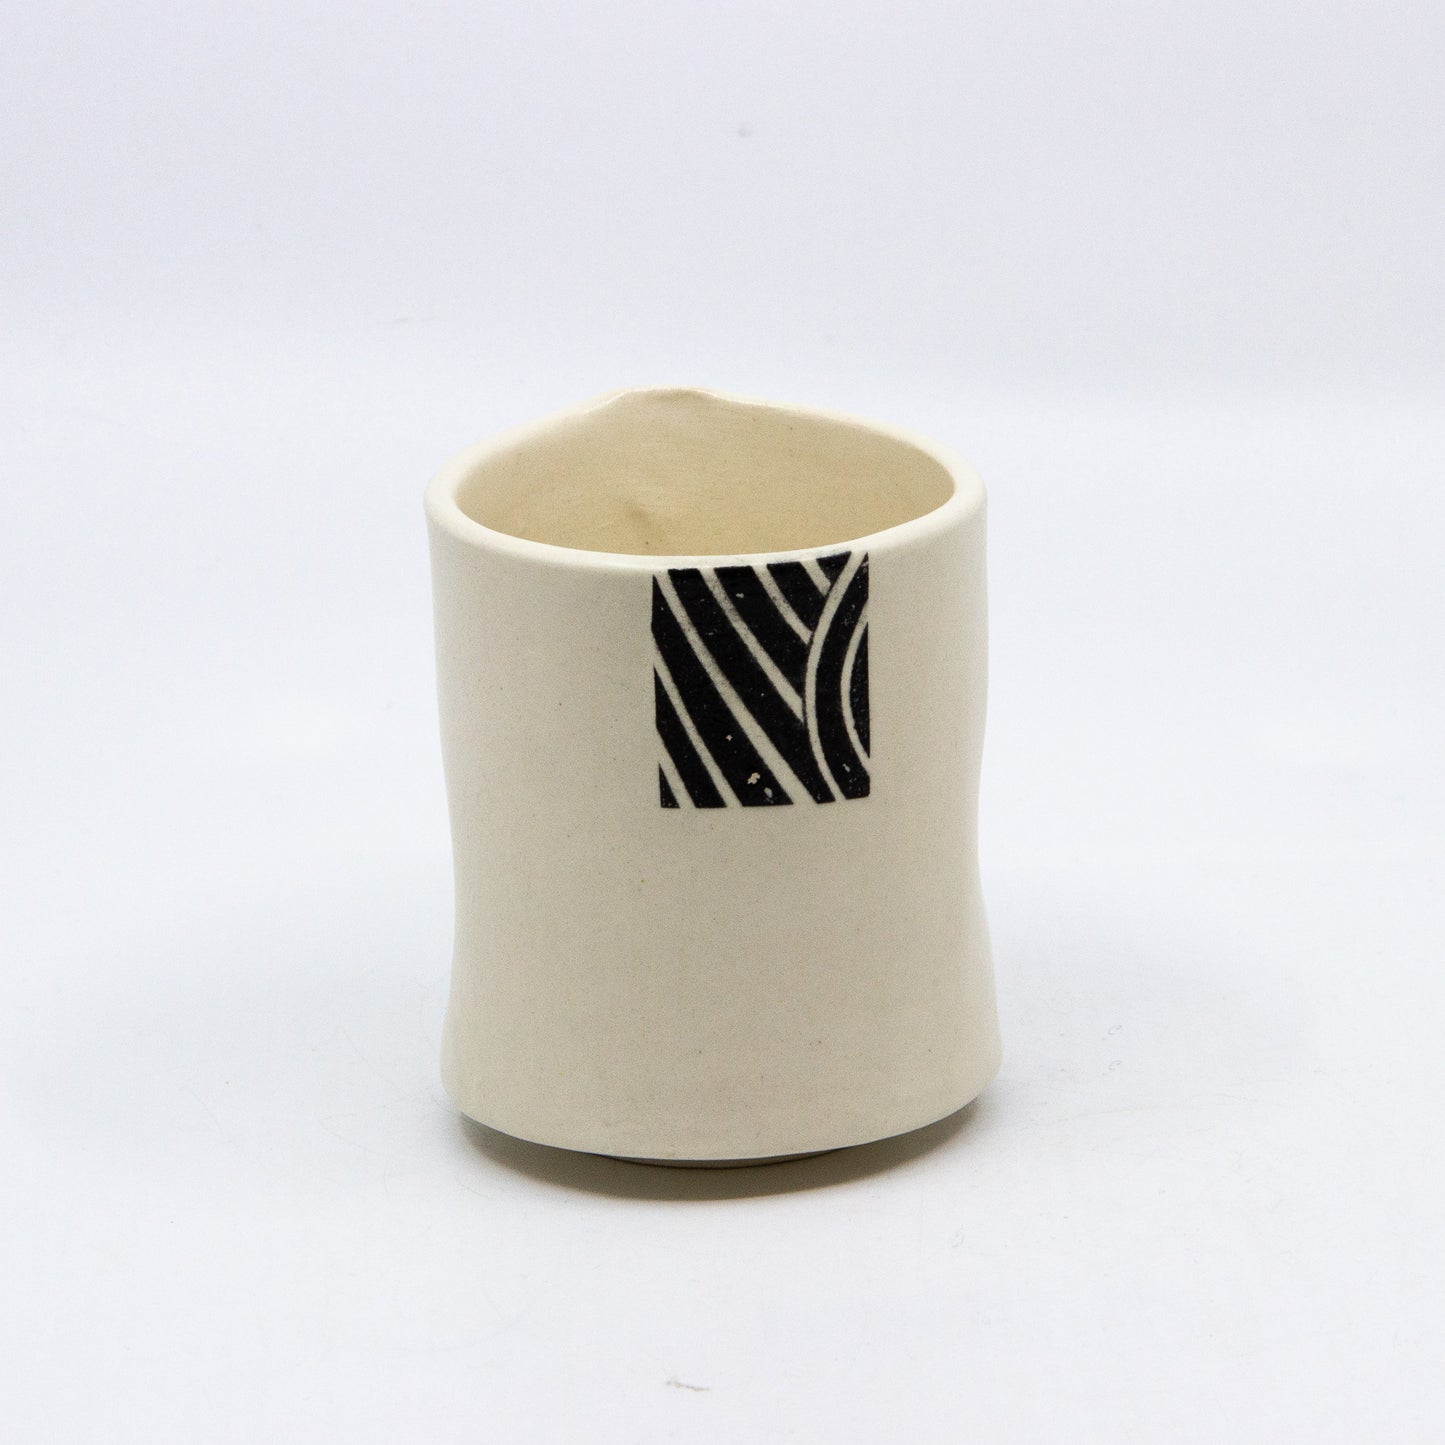 White tea cup with square black pattern